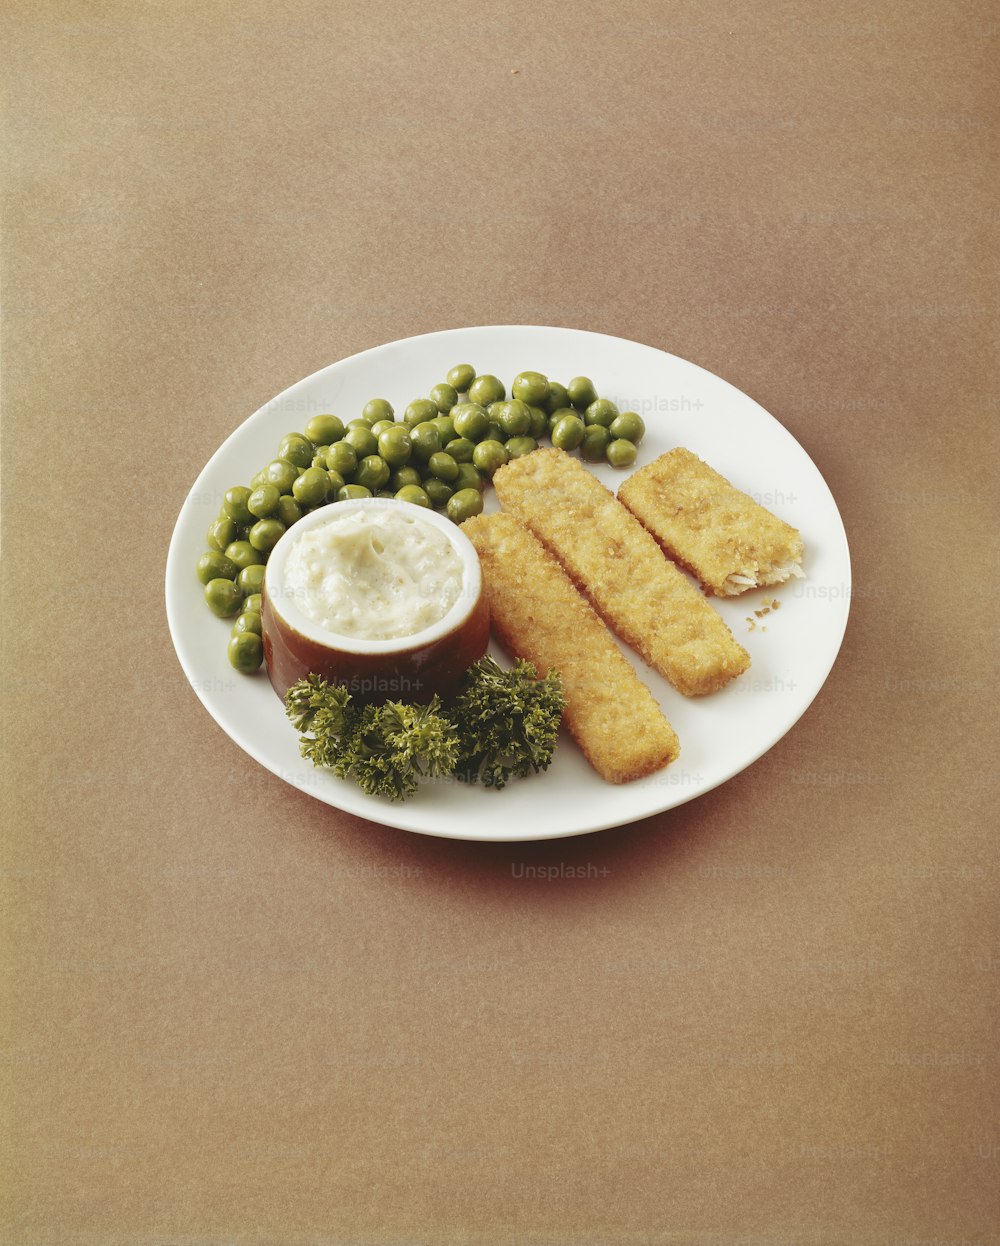 a plate of food with peas, peas, and bread